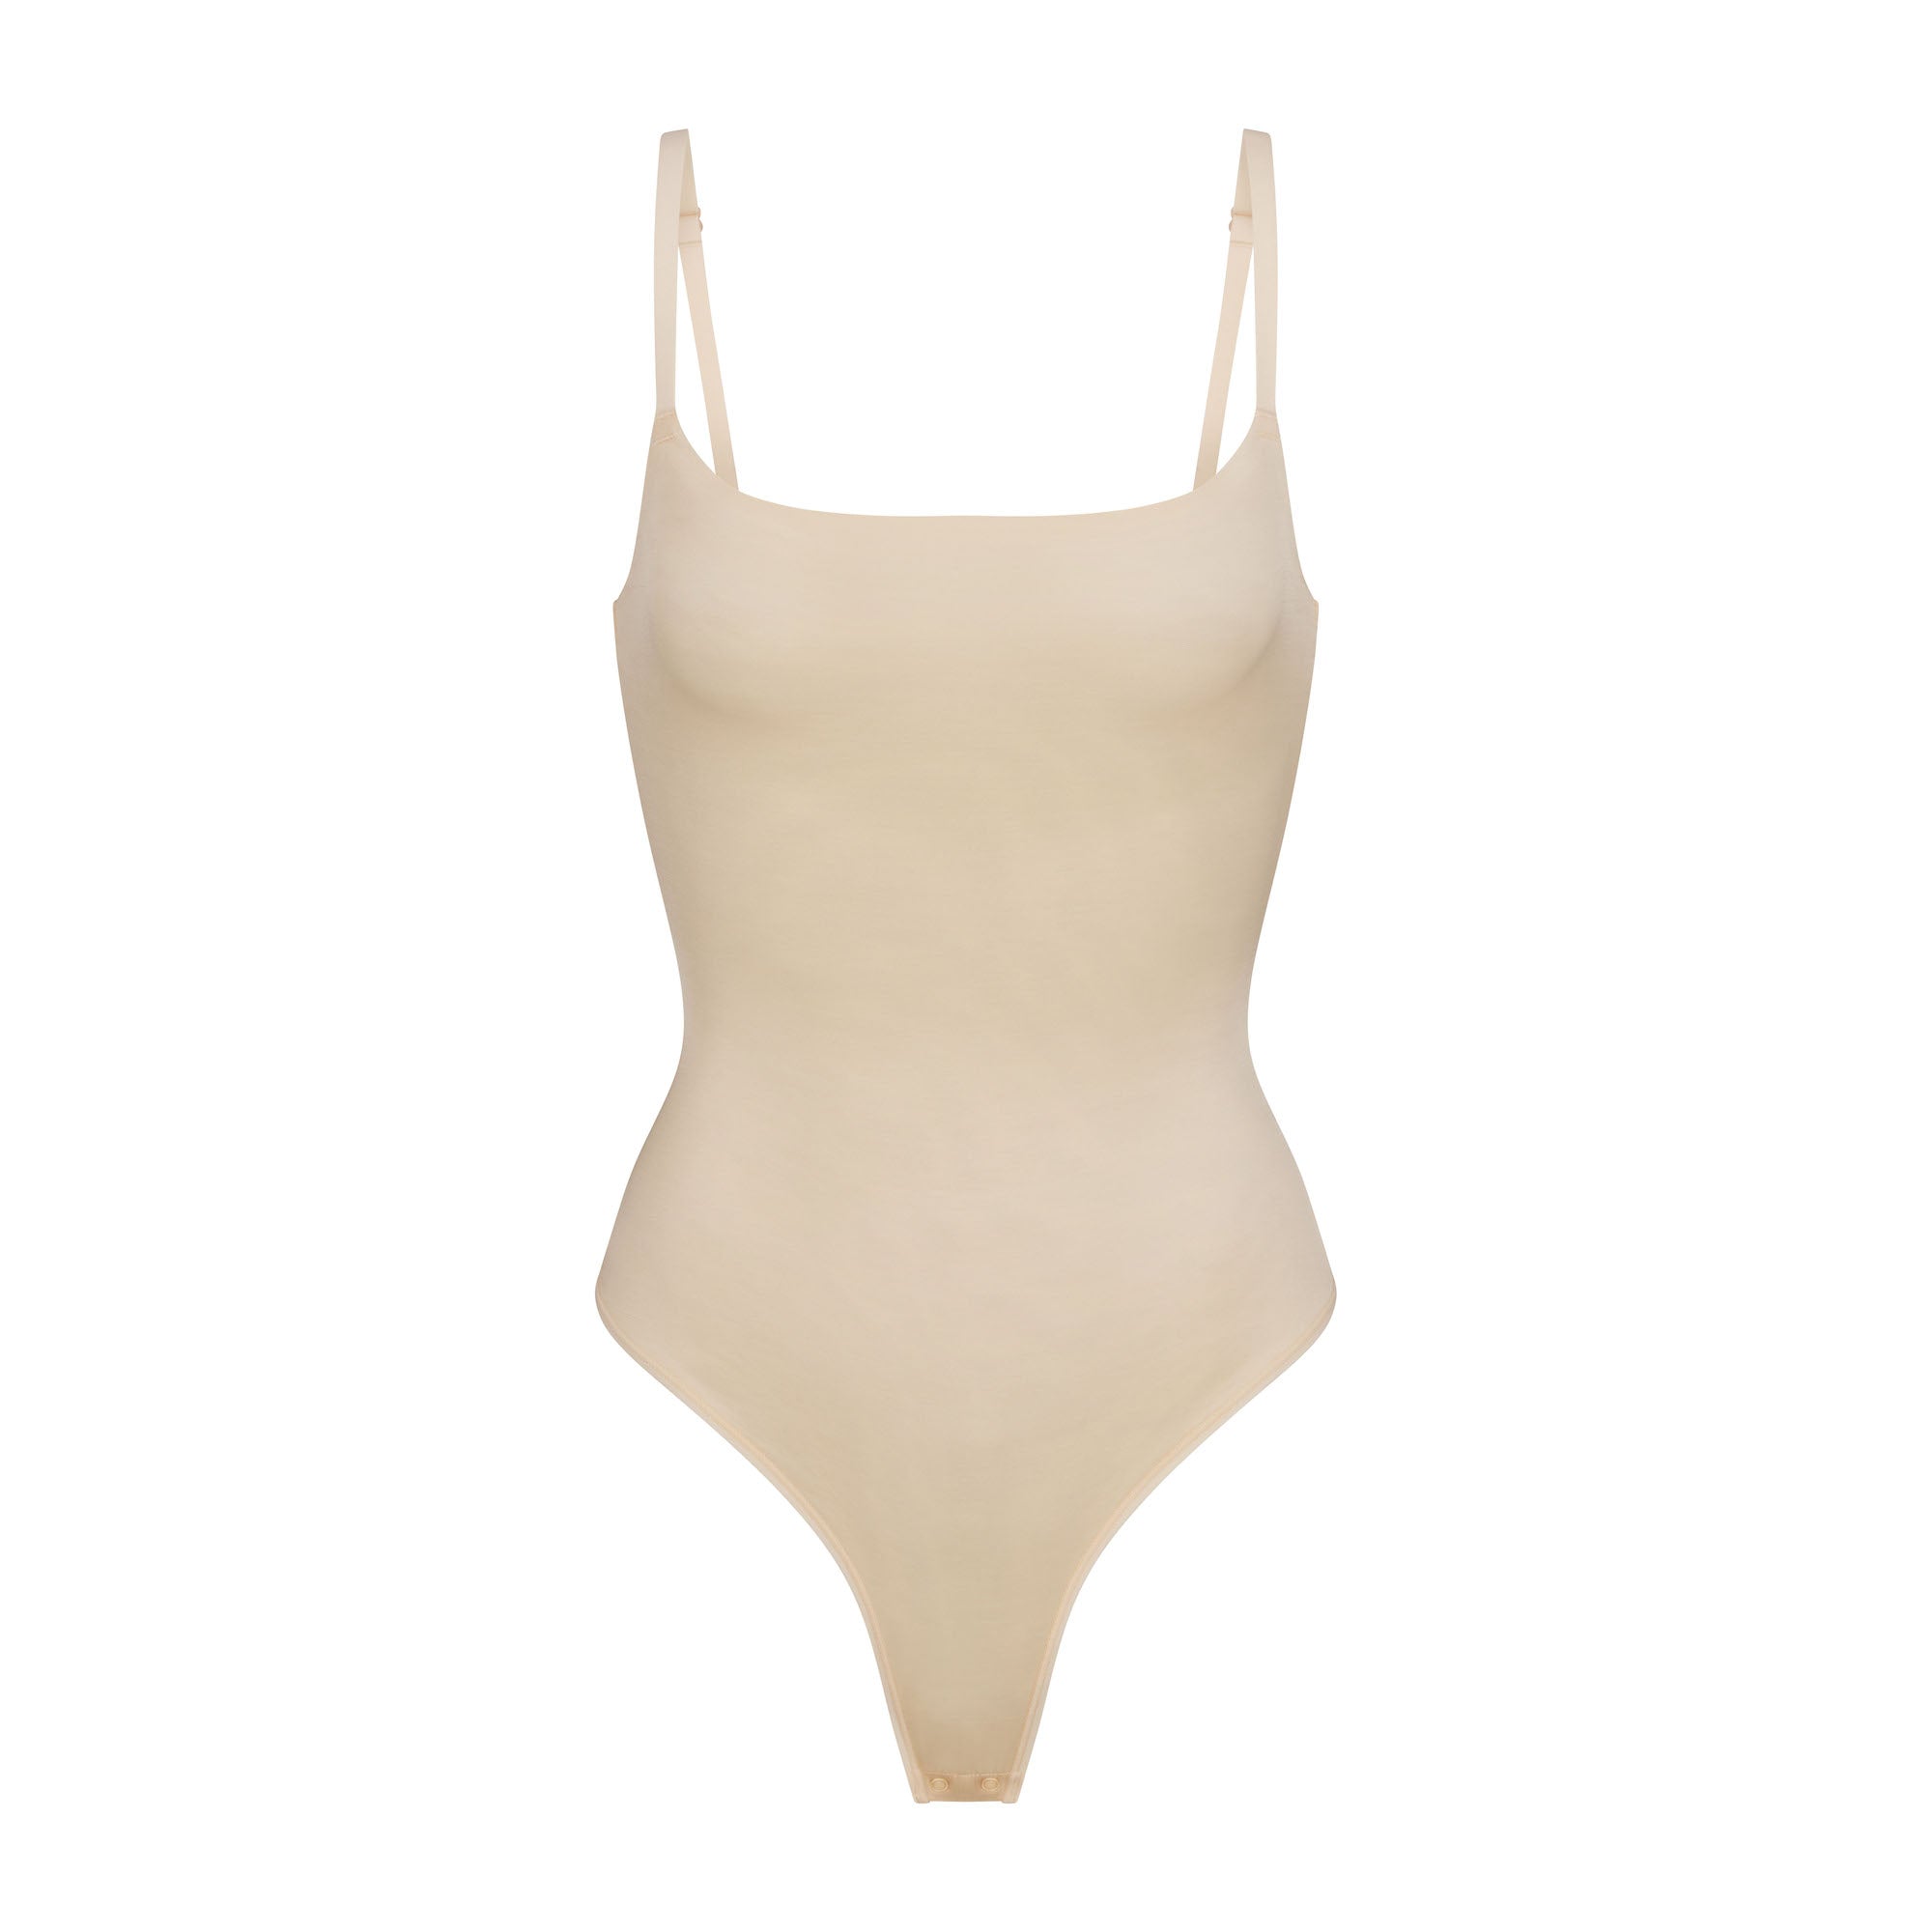 BARELY THERE SCOOP BODYSUIT | SAND - BARELY THERE SCOOP BODYSUIT | SAND